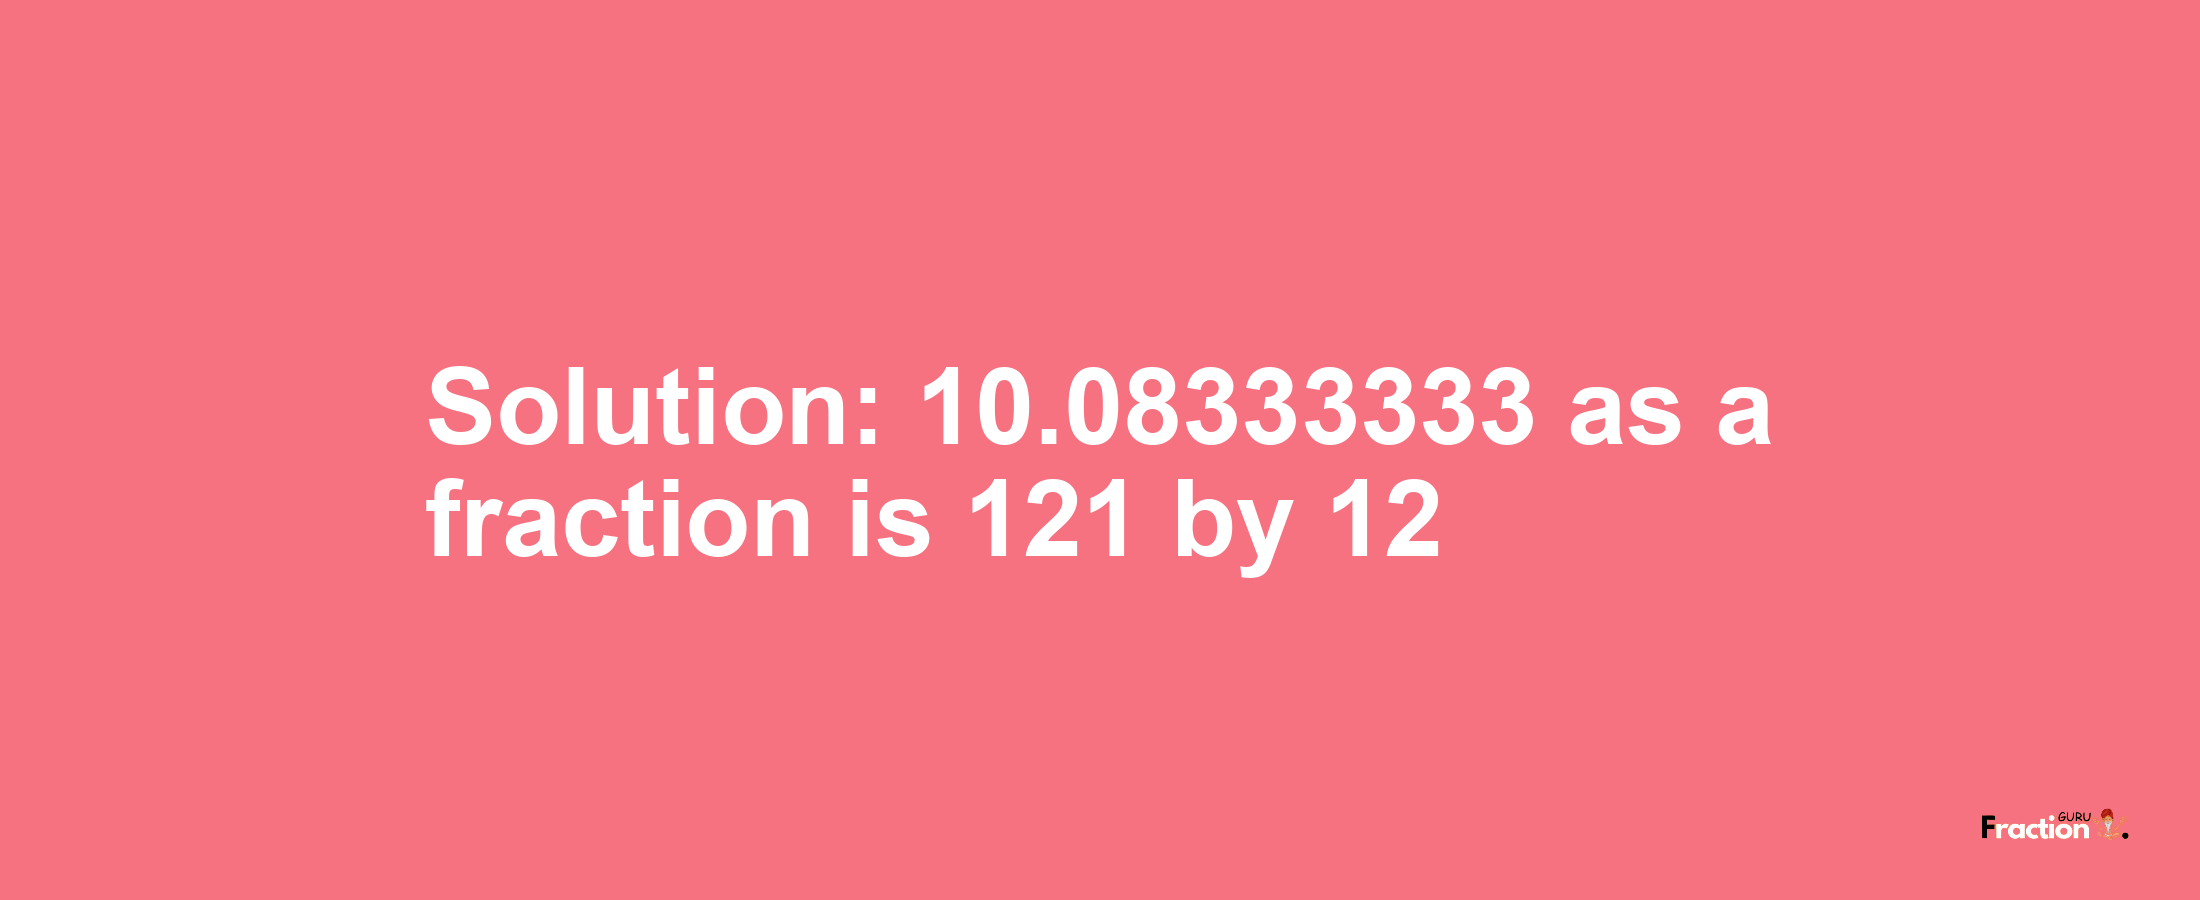 Solution:10.08333333 as a fraction is 121/12